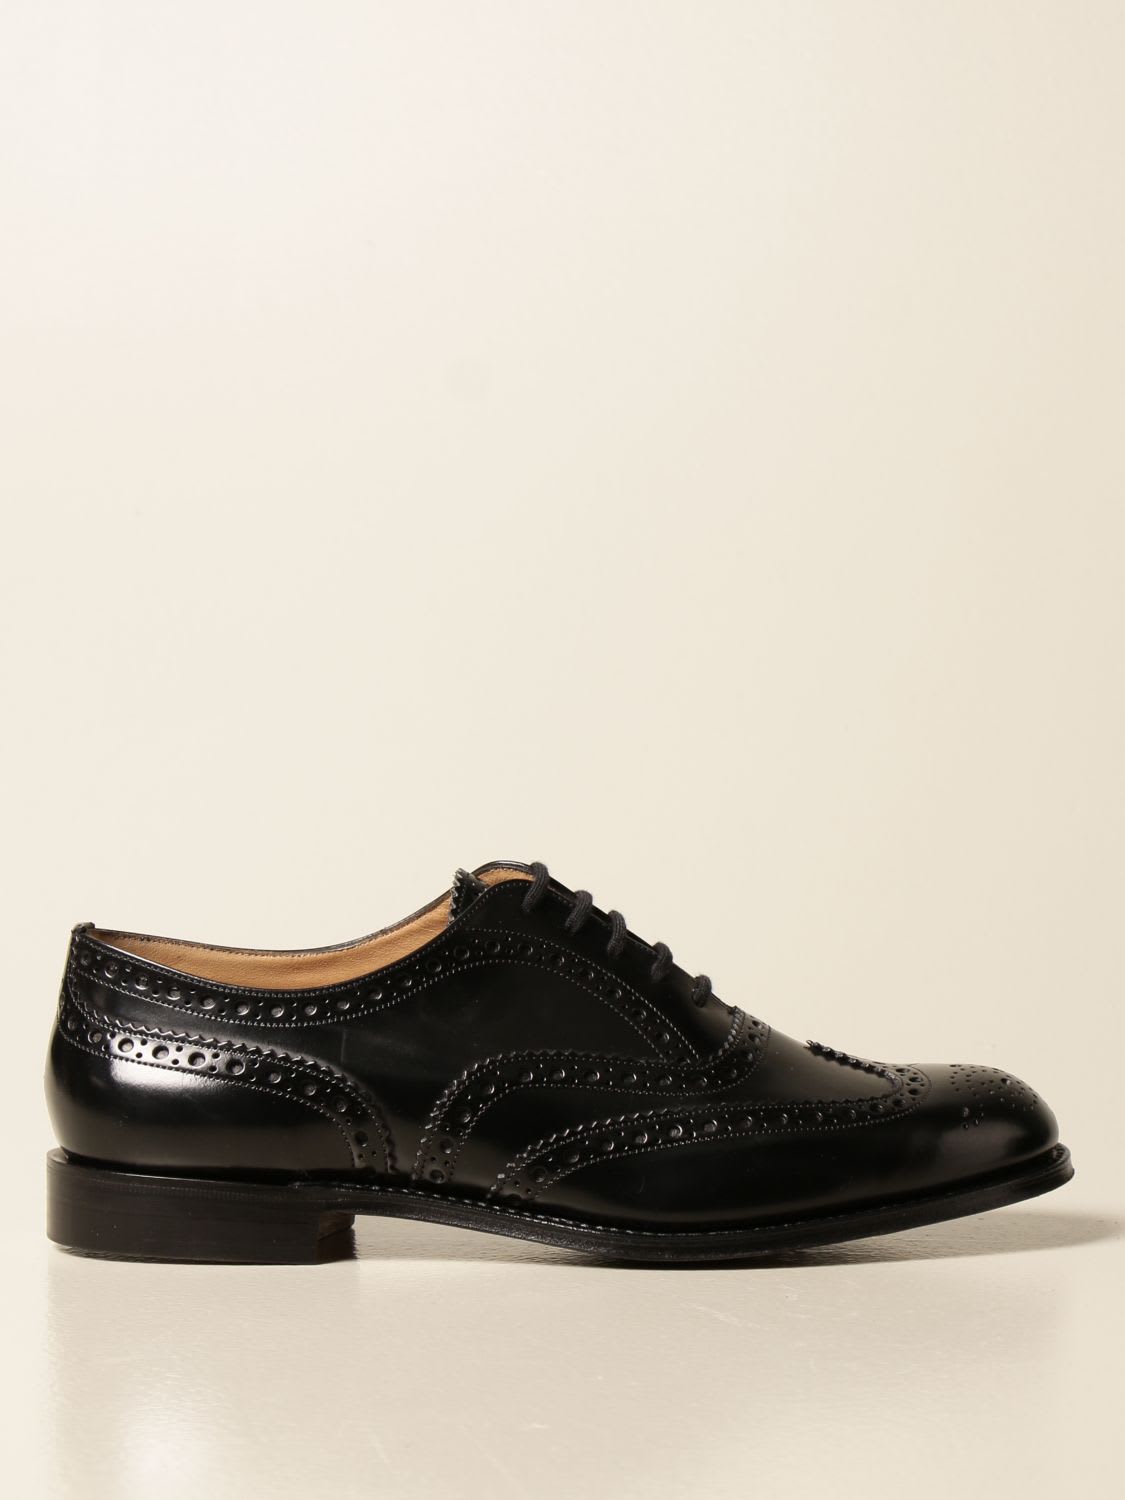 Churchs Brogue Shoes Burwood 2 Churchs Brogue Shoes In Brushed Leather